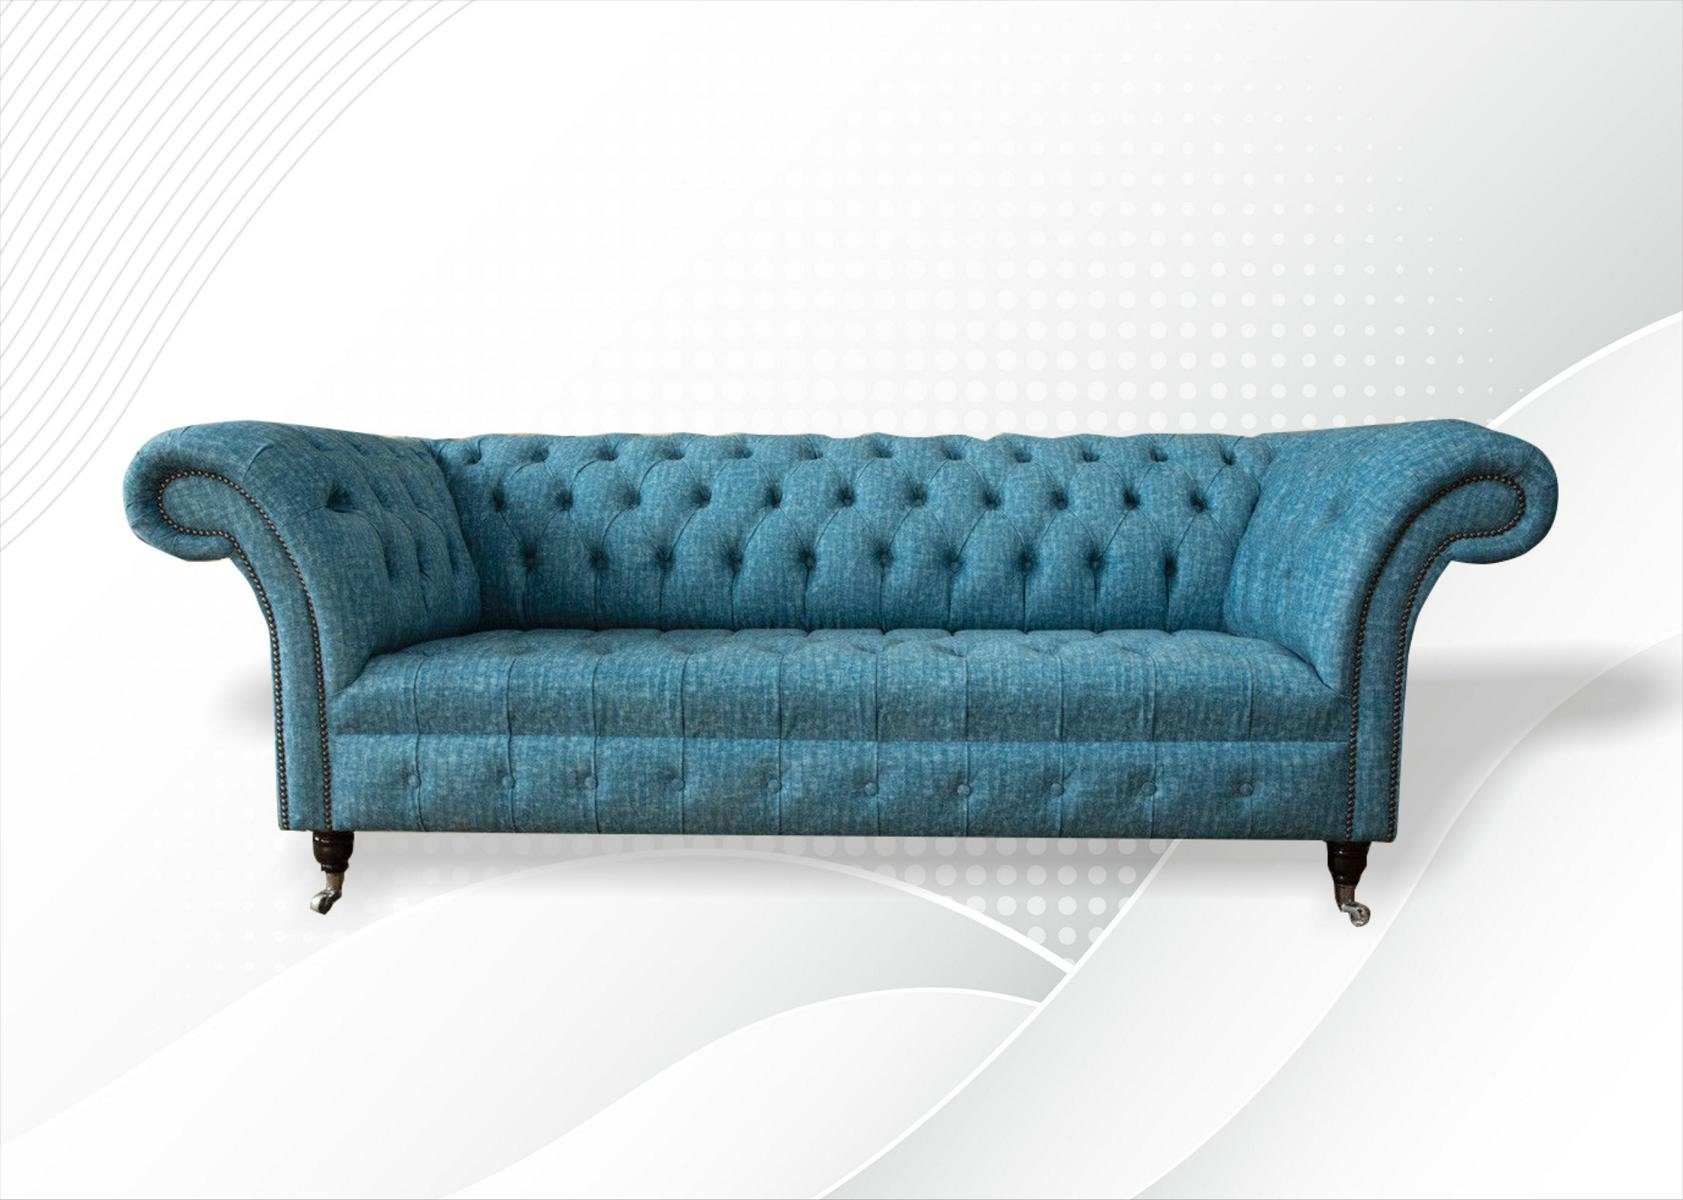 JVmoebel Sofa Moderne Sofa, Couch Chesterfield Blaue in Polstersofa luxus Made Europe